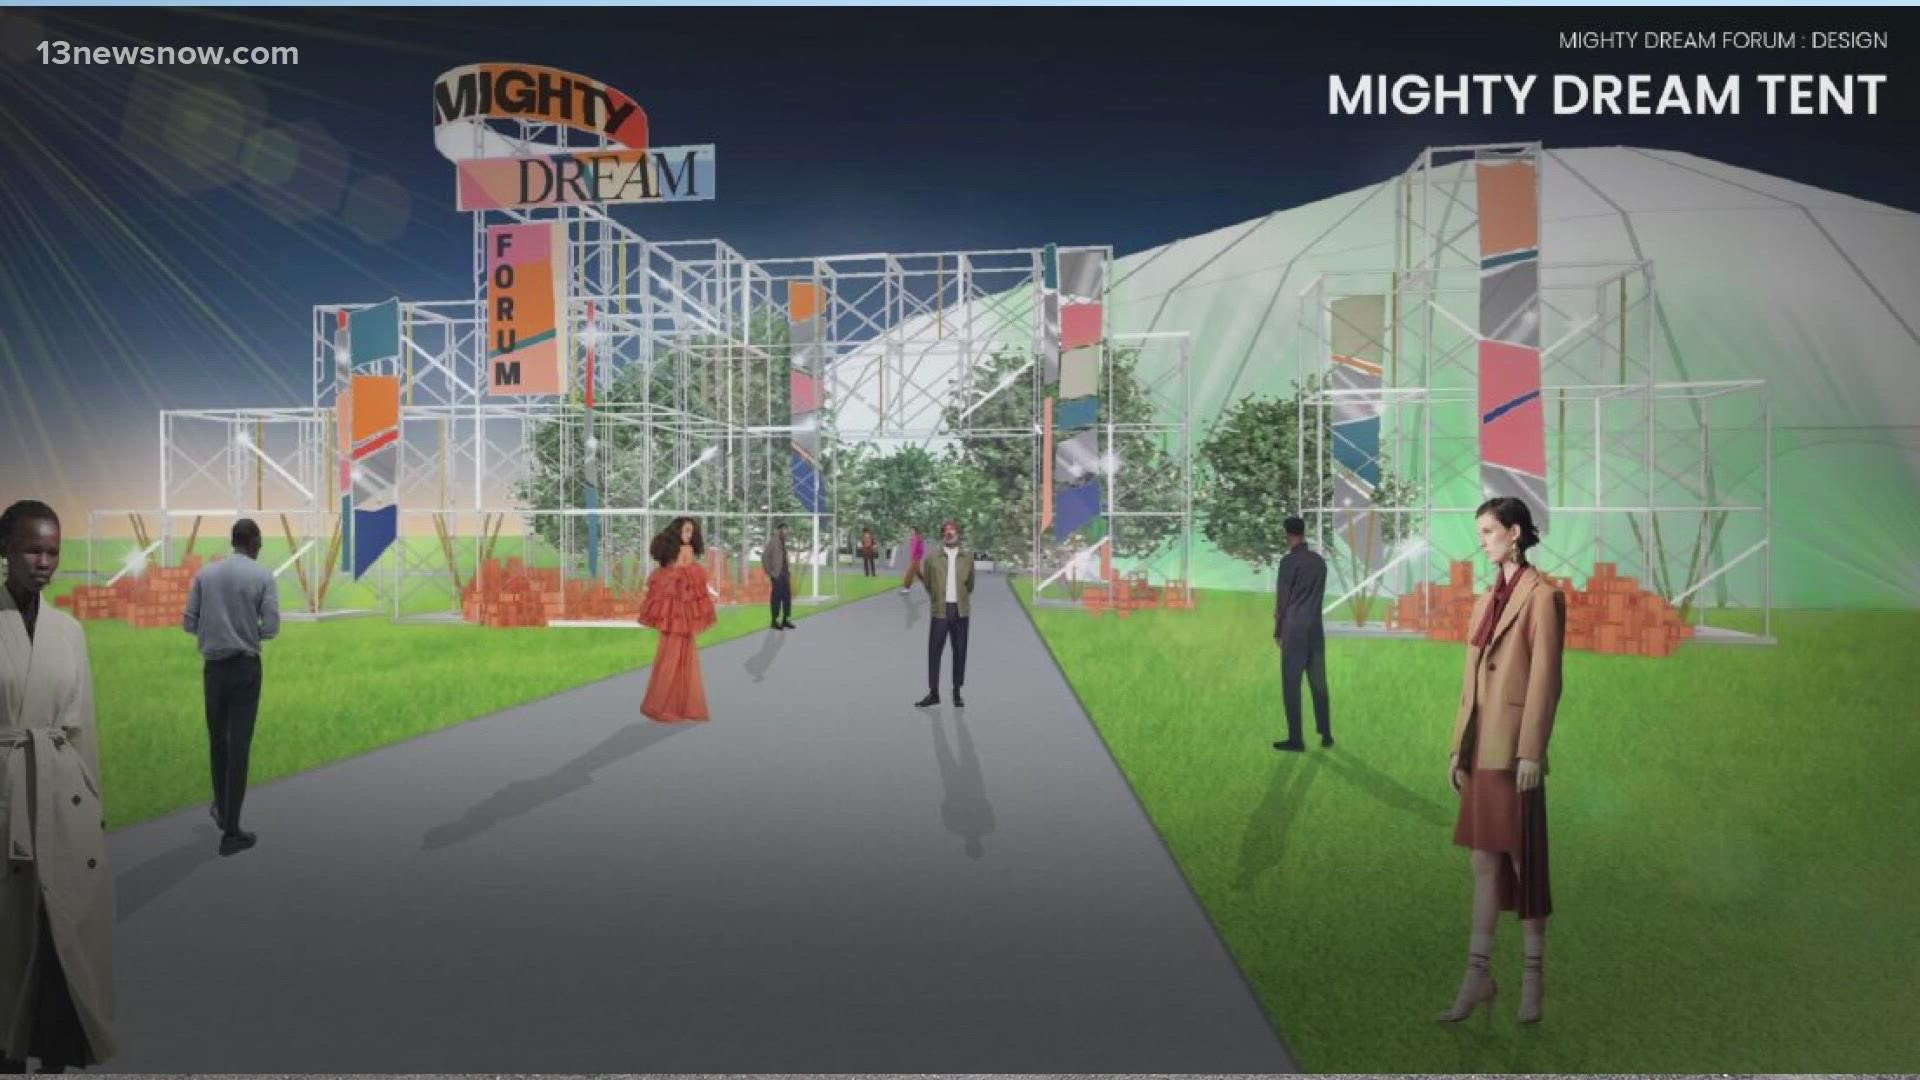 Norfolk leaders got a first look at the plans for Pharrell Williams' Mighty Dream Forum will look like in November.